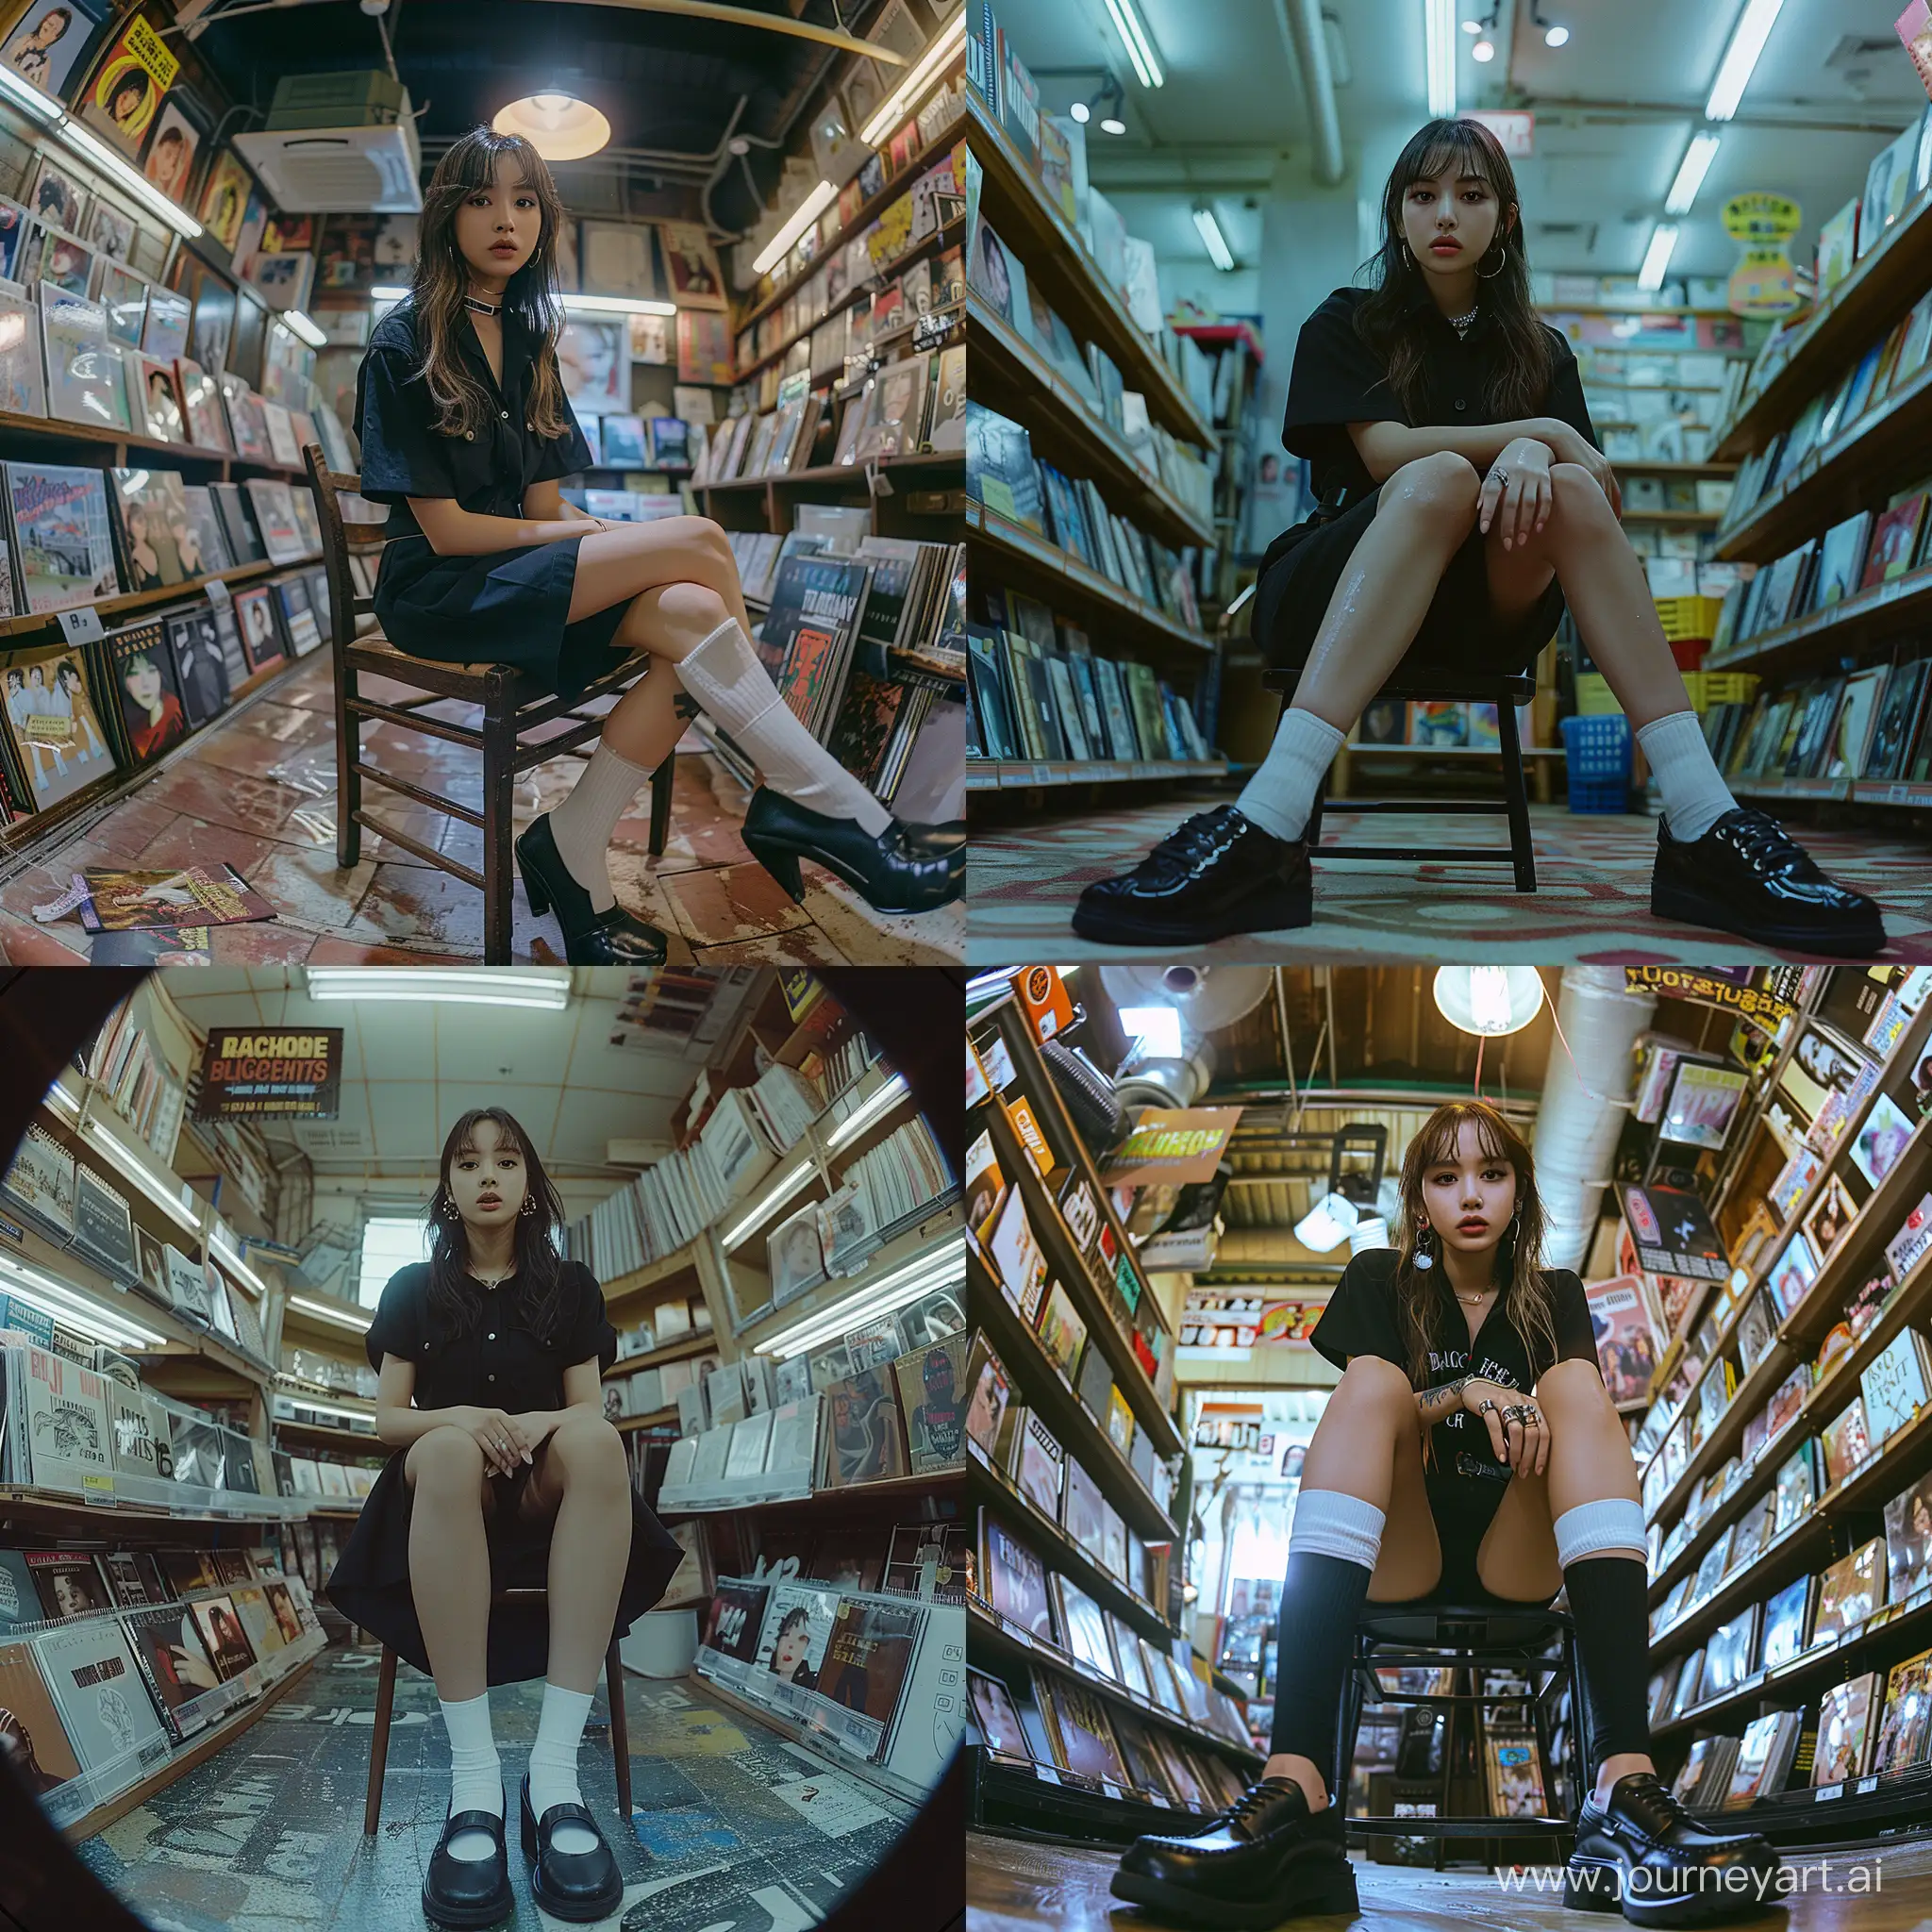 High resolution fashion profile photo of blackpink's jennie,wearing black shirt,black short pants and black loafers shoes with white socks, siting on chair in album store,bared face,fisheye lens--ar 9:16 --style raw --stylize 550 --v 6